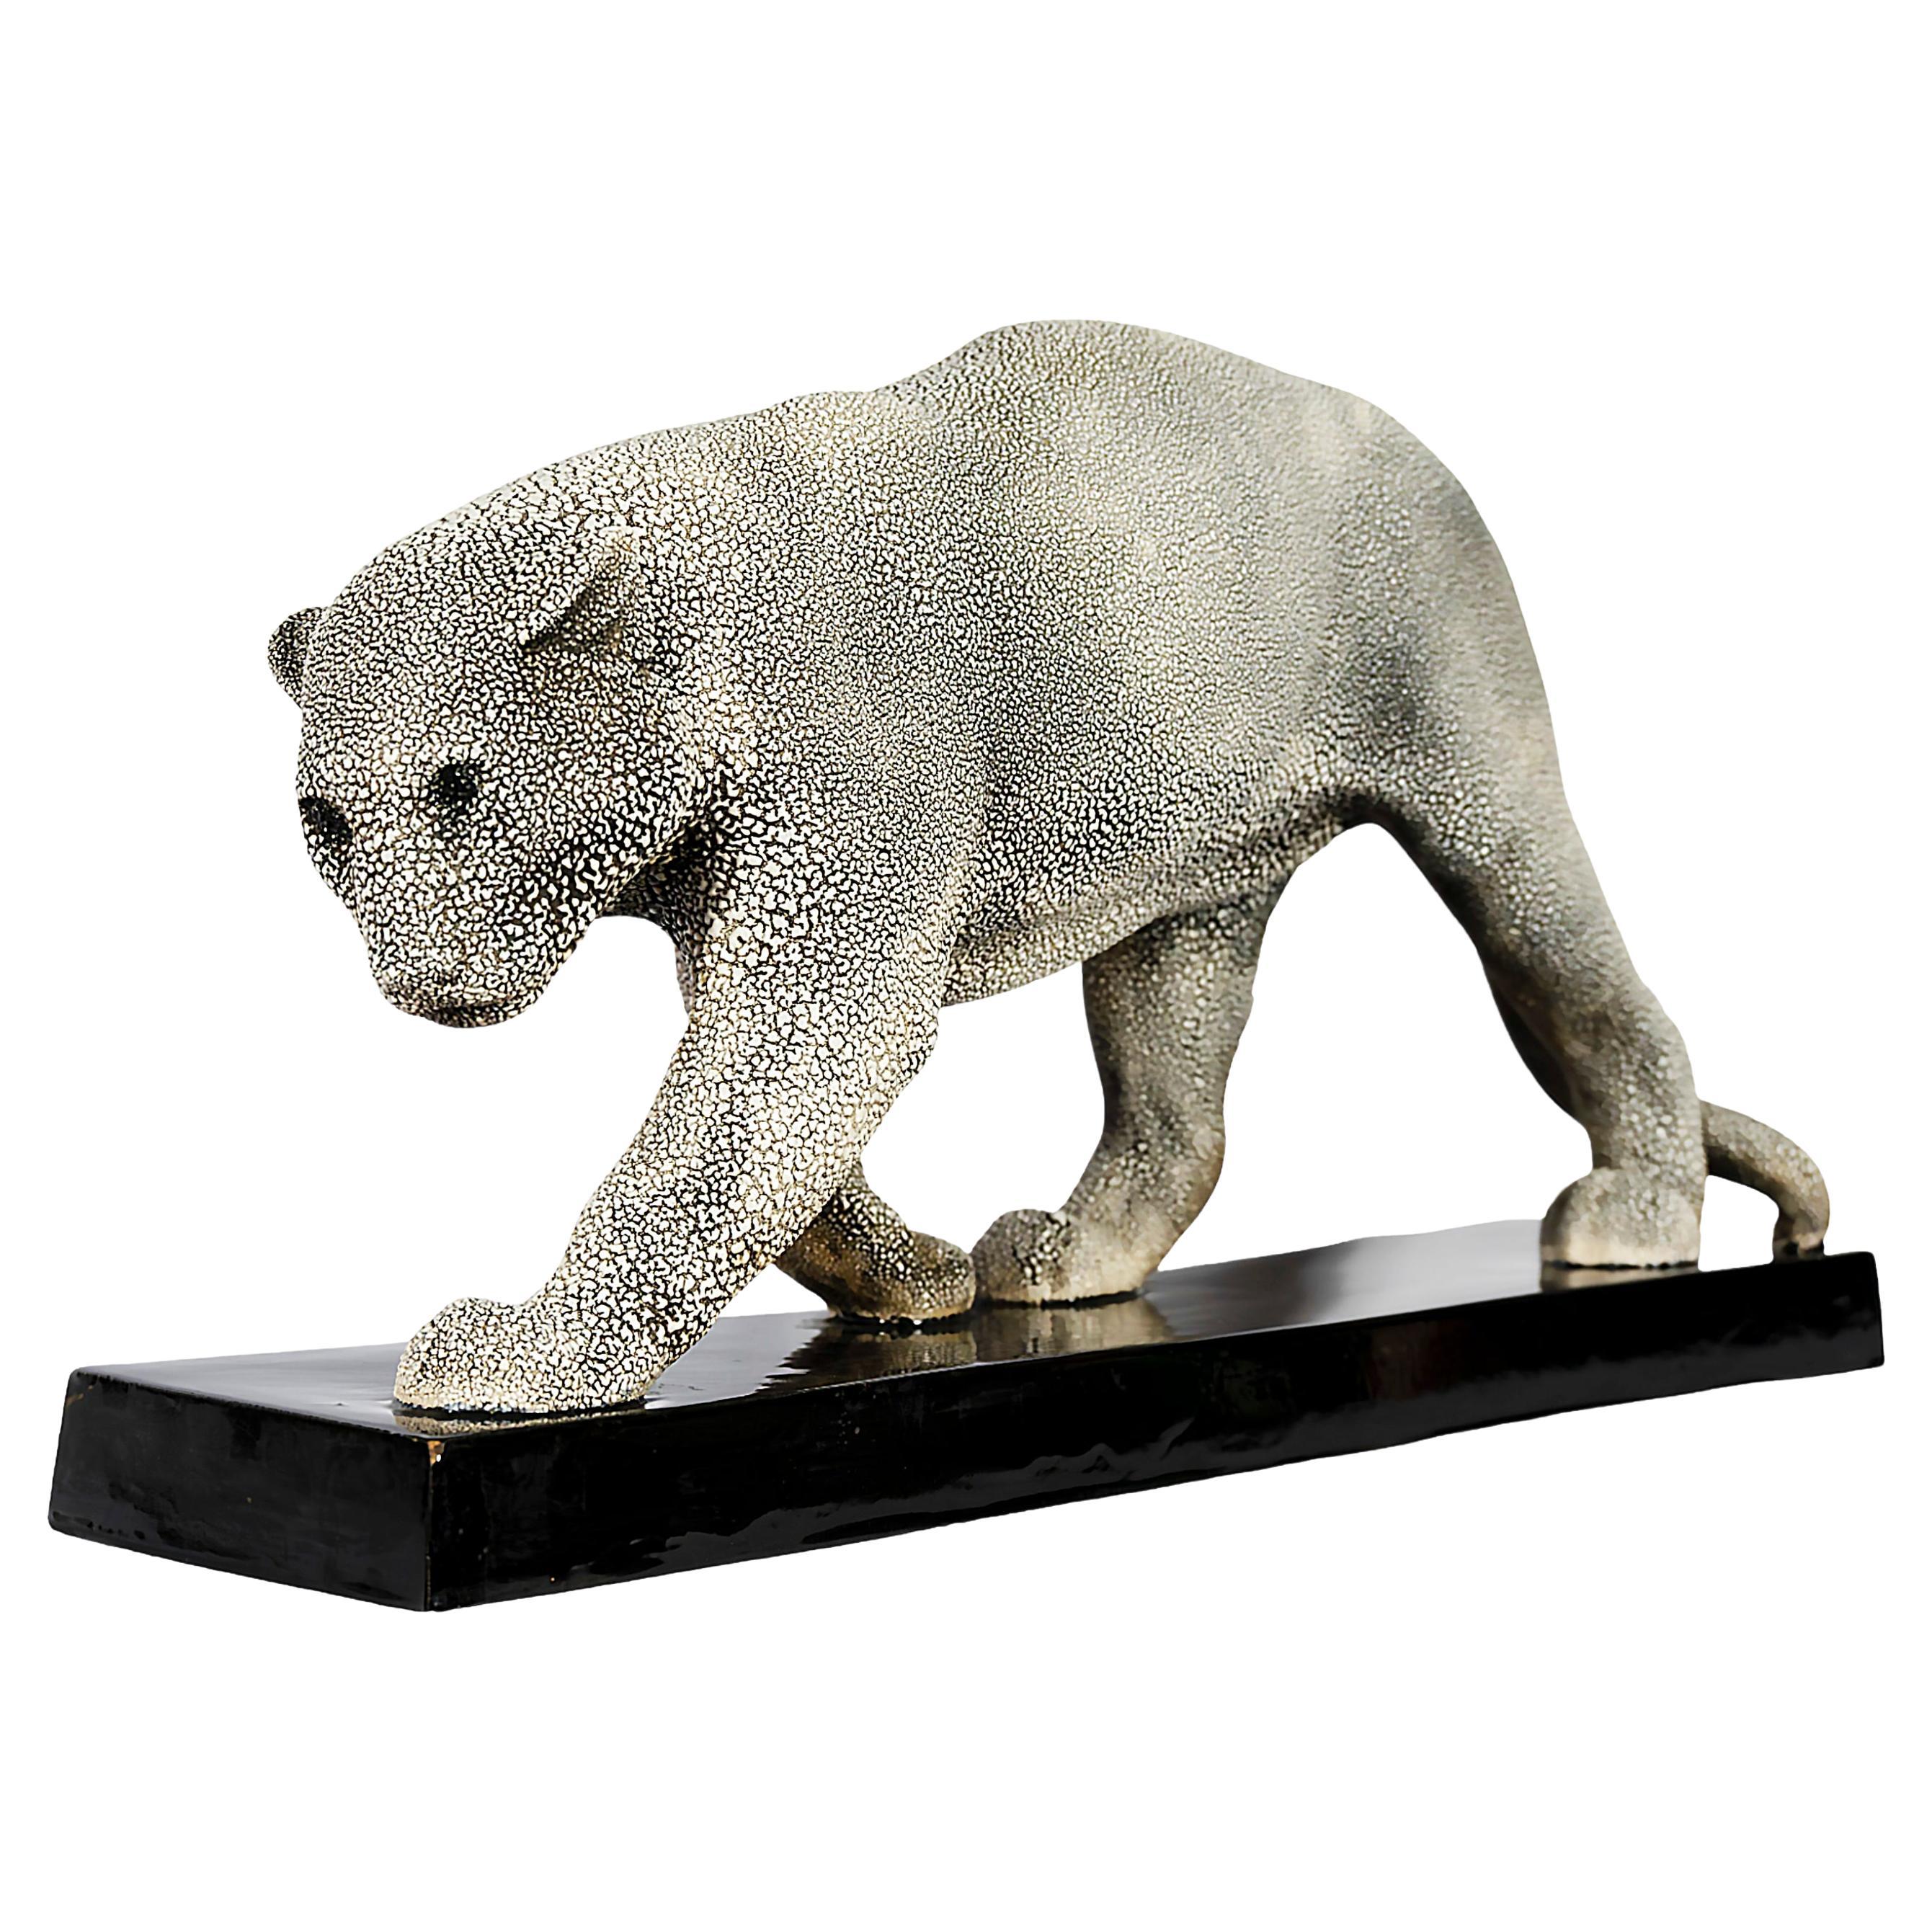 French Art Deco Ceramic Panther Sculpture by G.Beauvais for Edition Kaza, 1930's